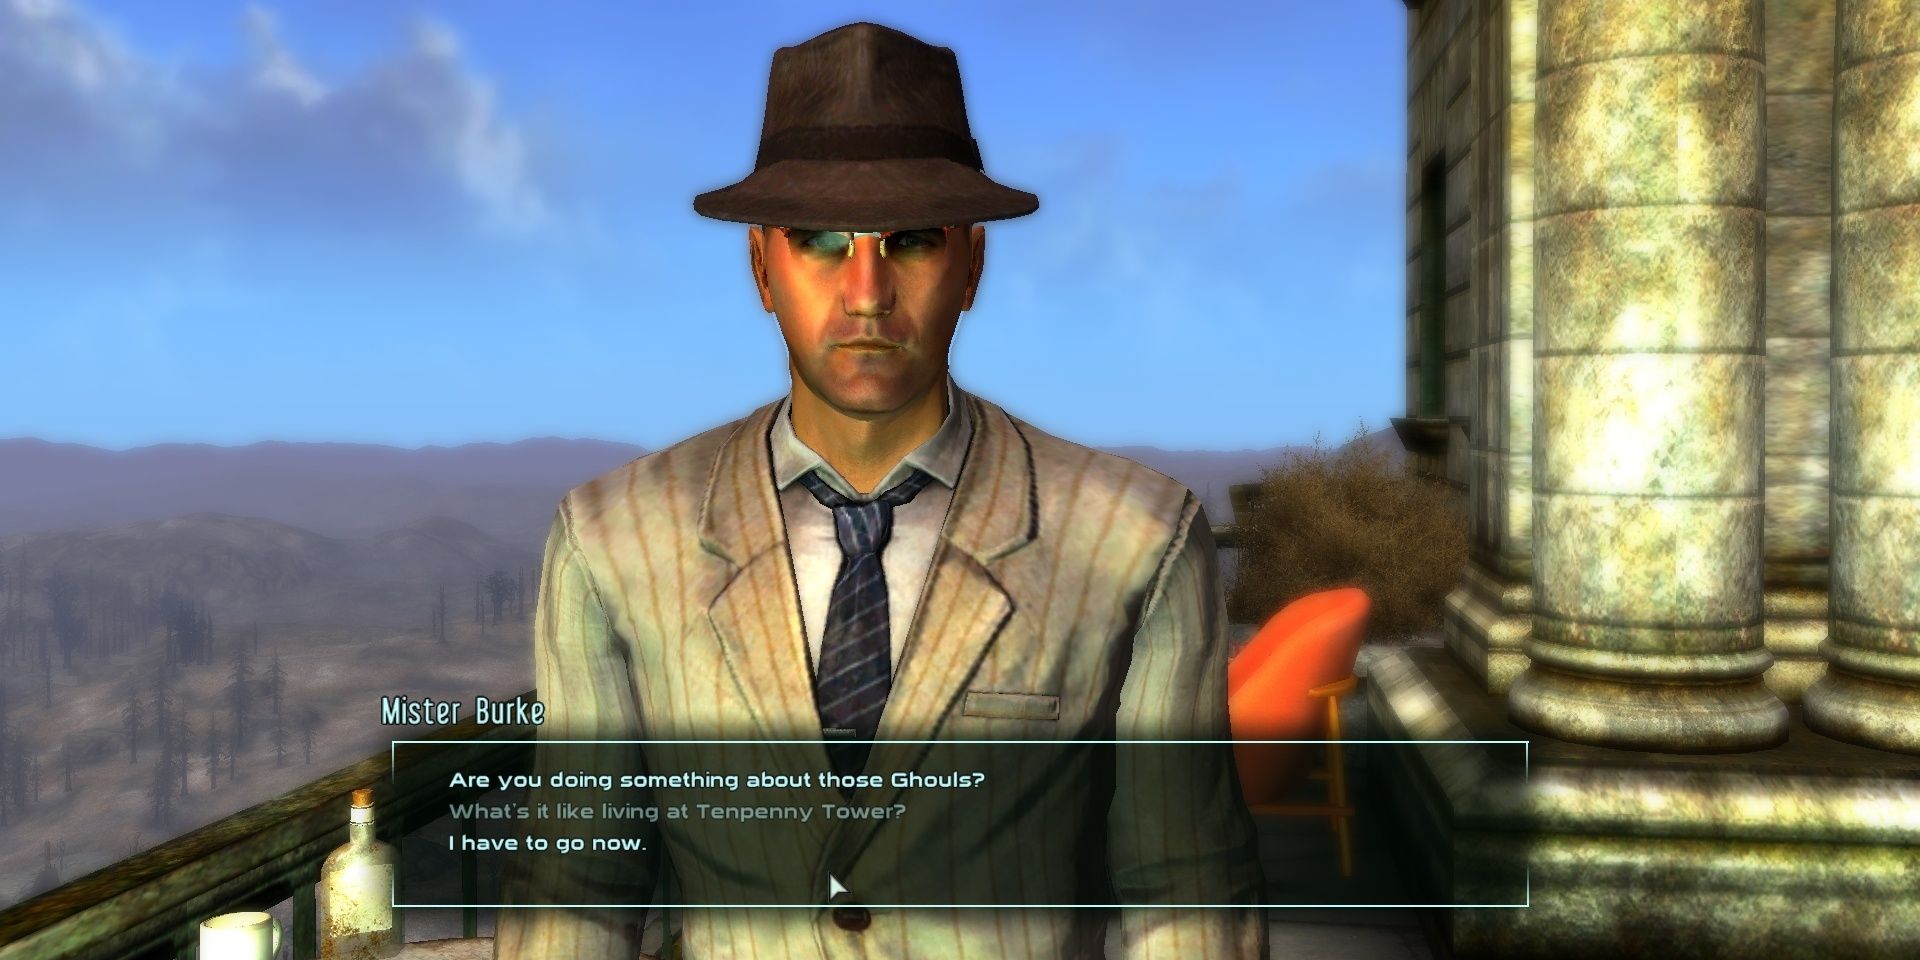 A screenshot of Mister Burke talking to the player in Fallout 3 